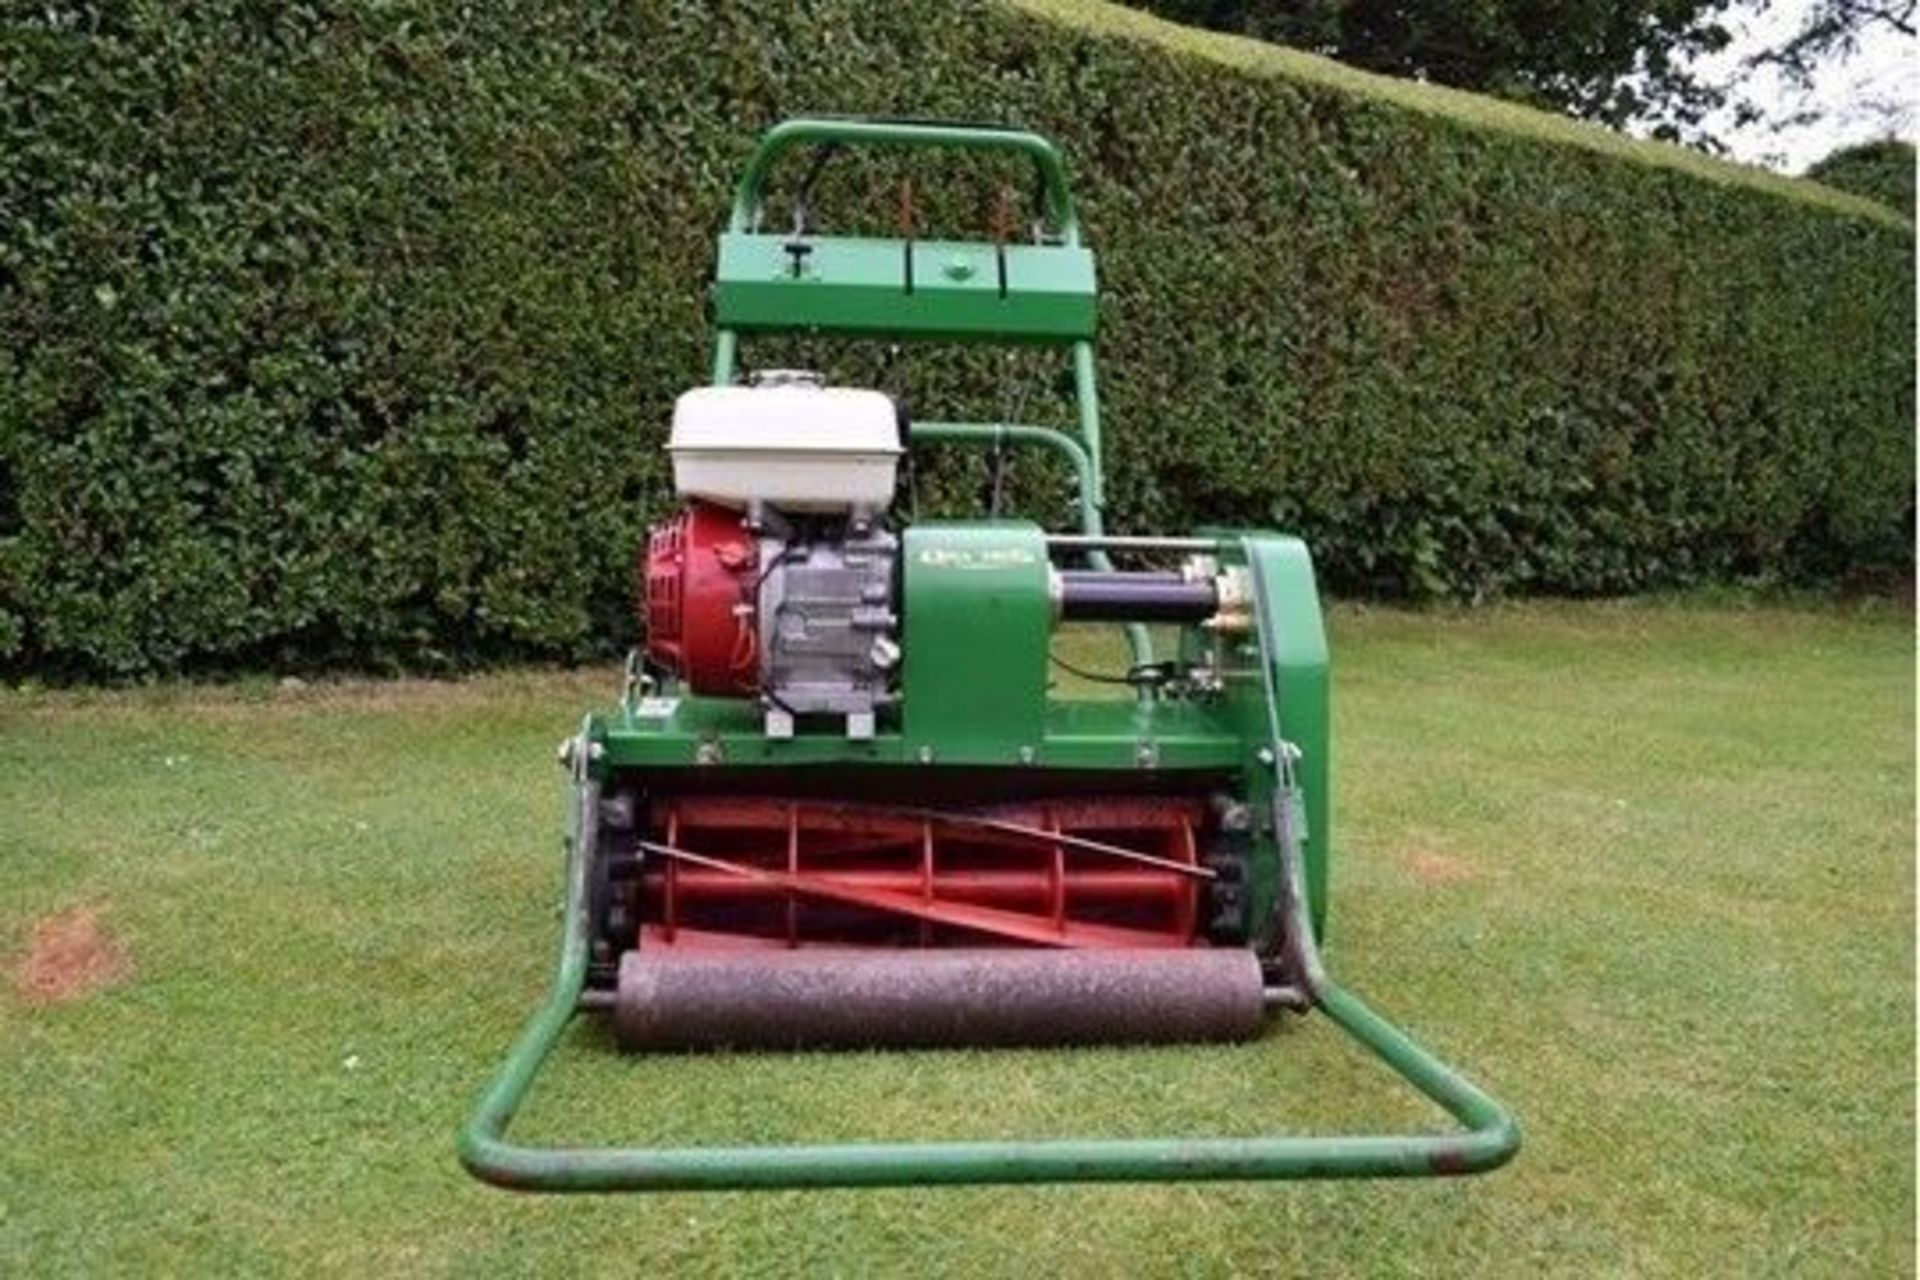 2004 Dennis G560 5 Blade Cylinder Mower With Grass Box - Image 7 of 11